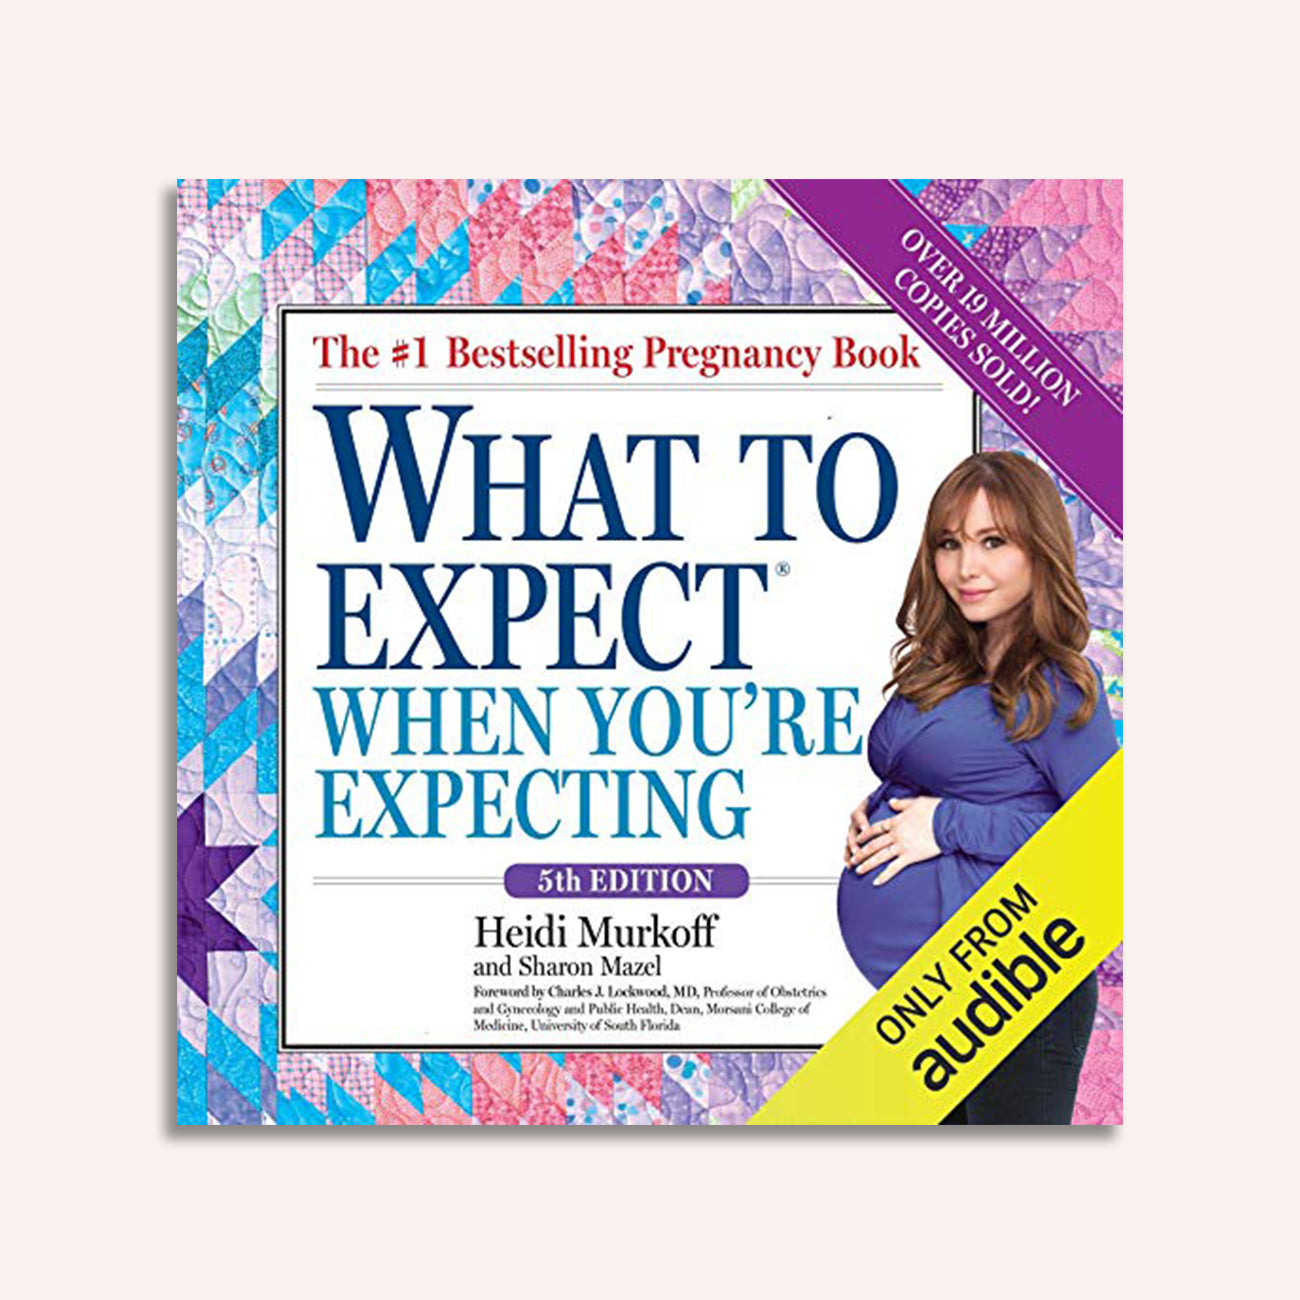 What To Expect When You’re Expecting book